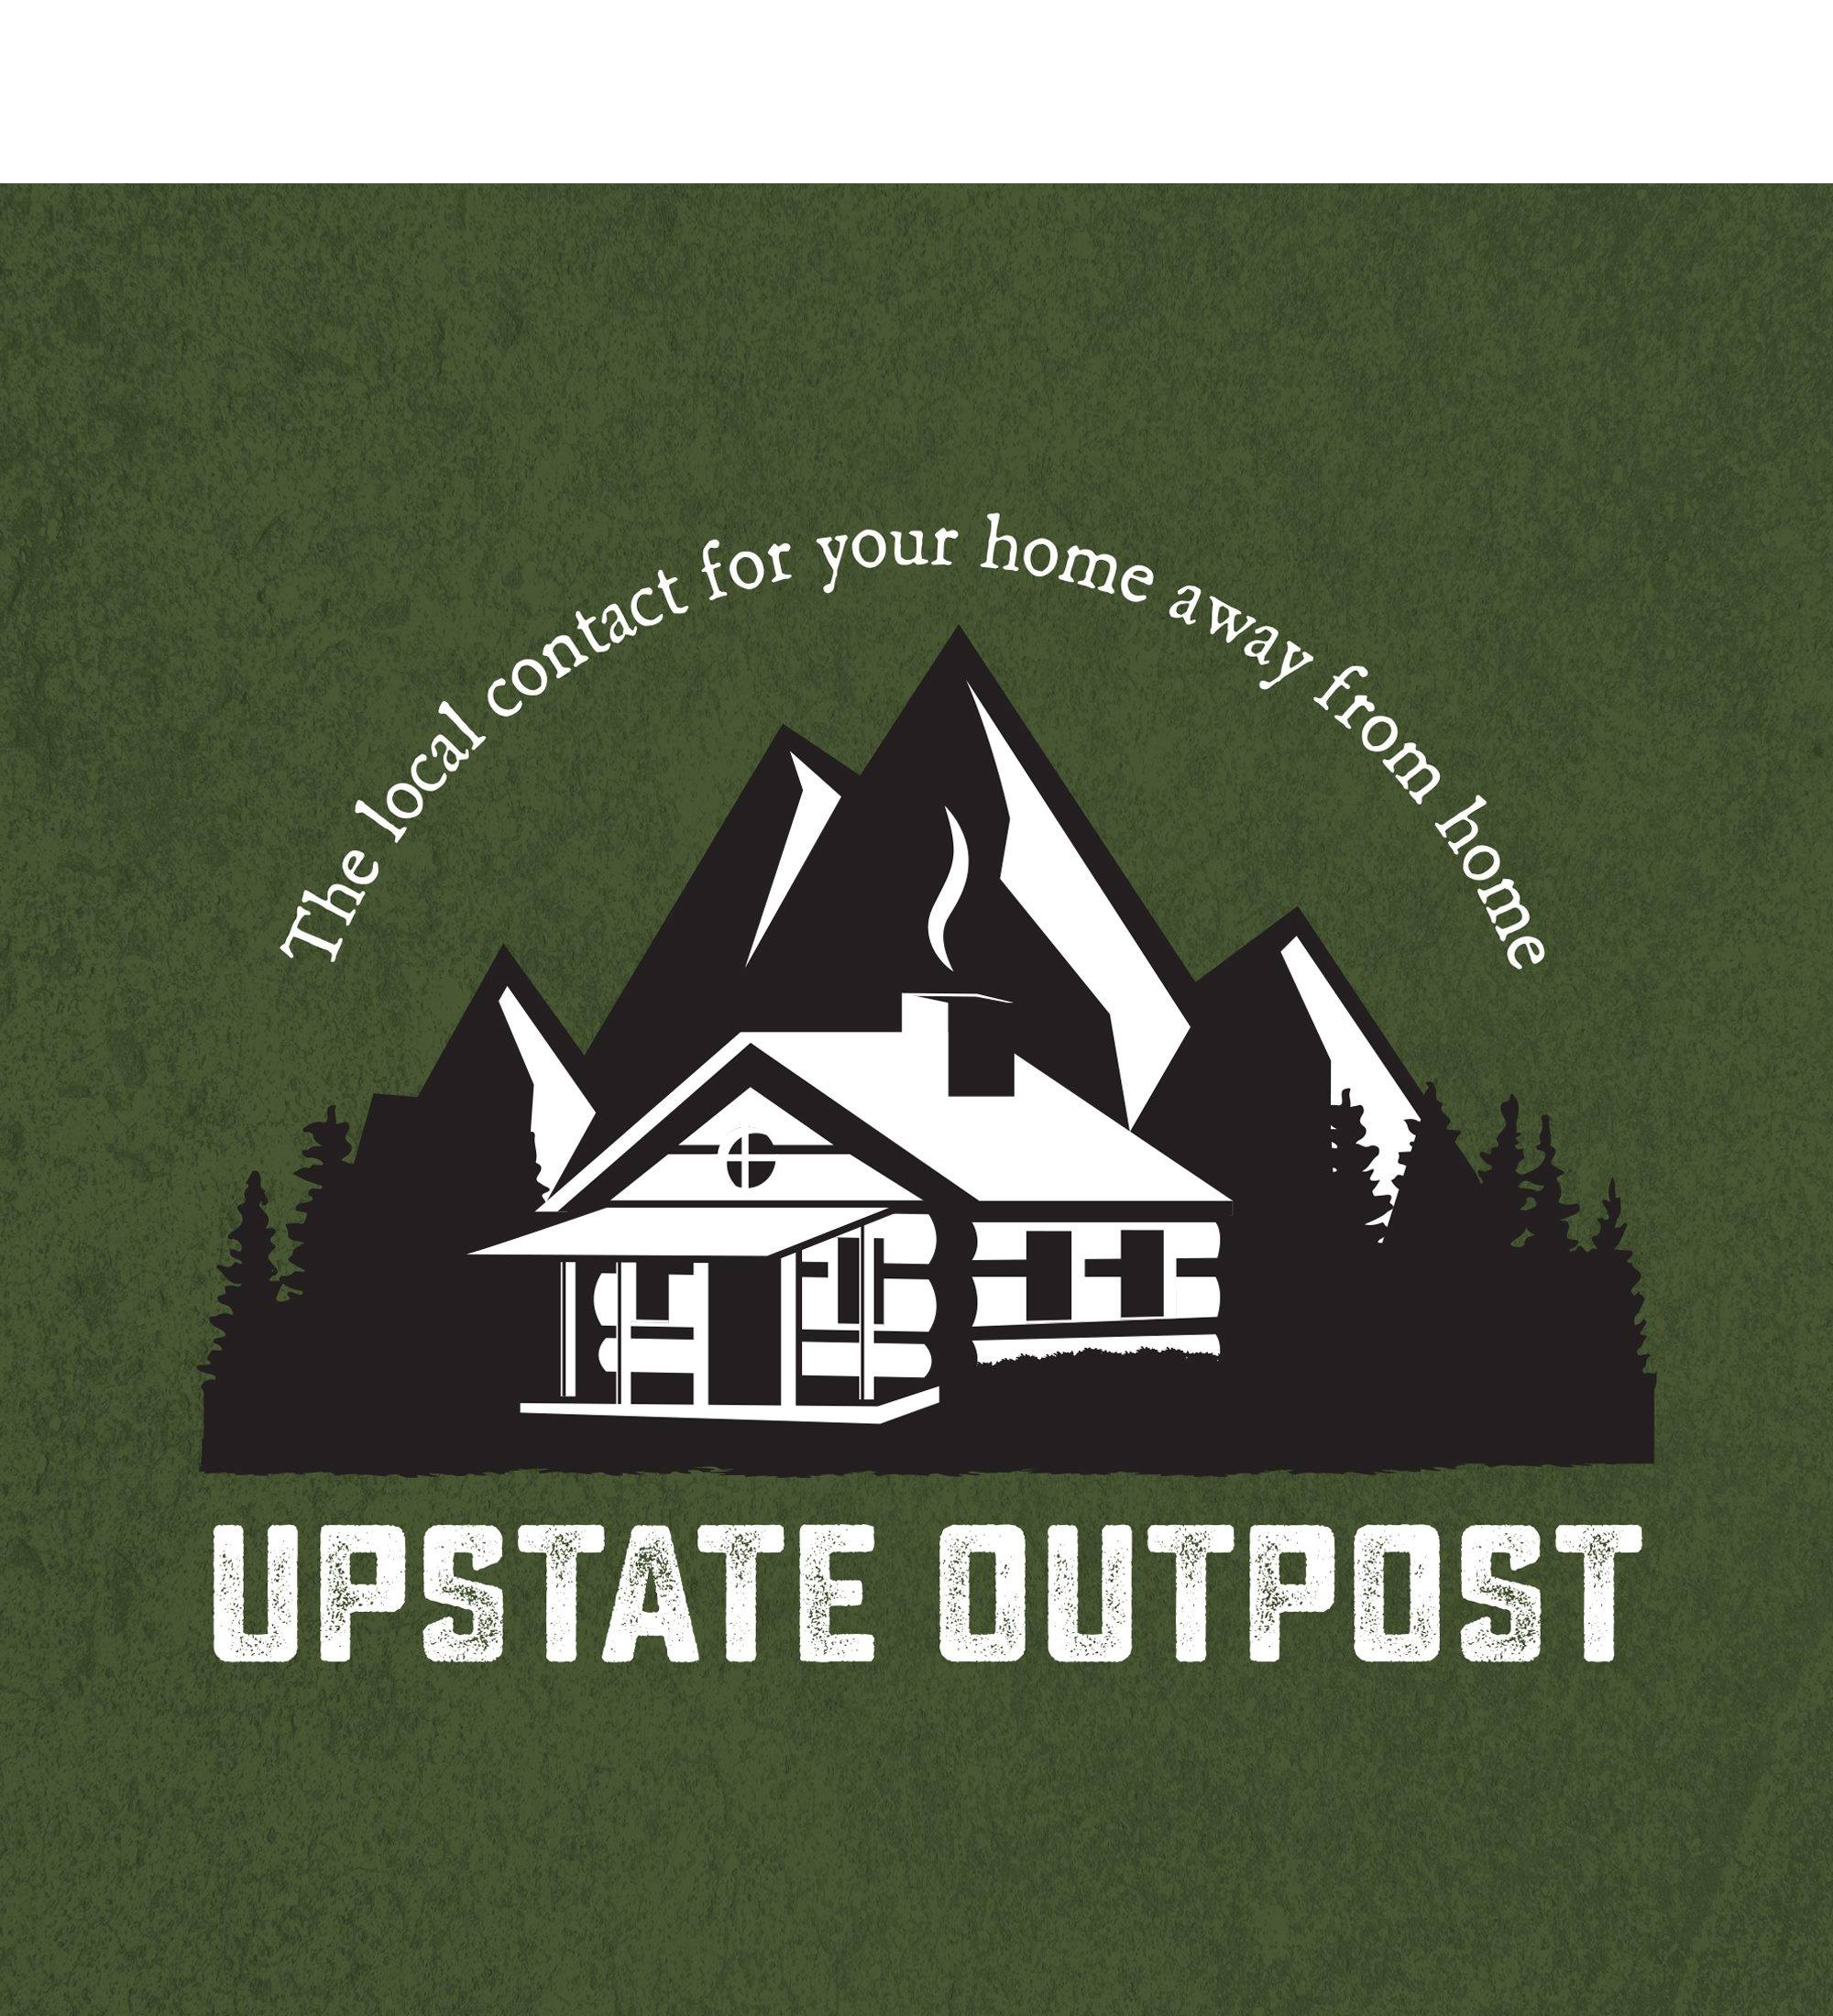 Upstate Outpost